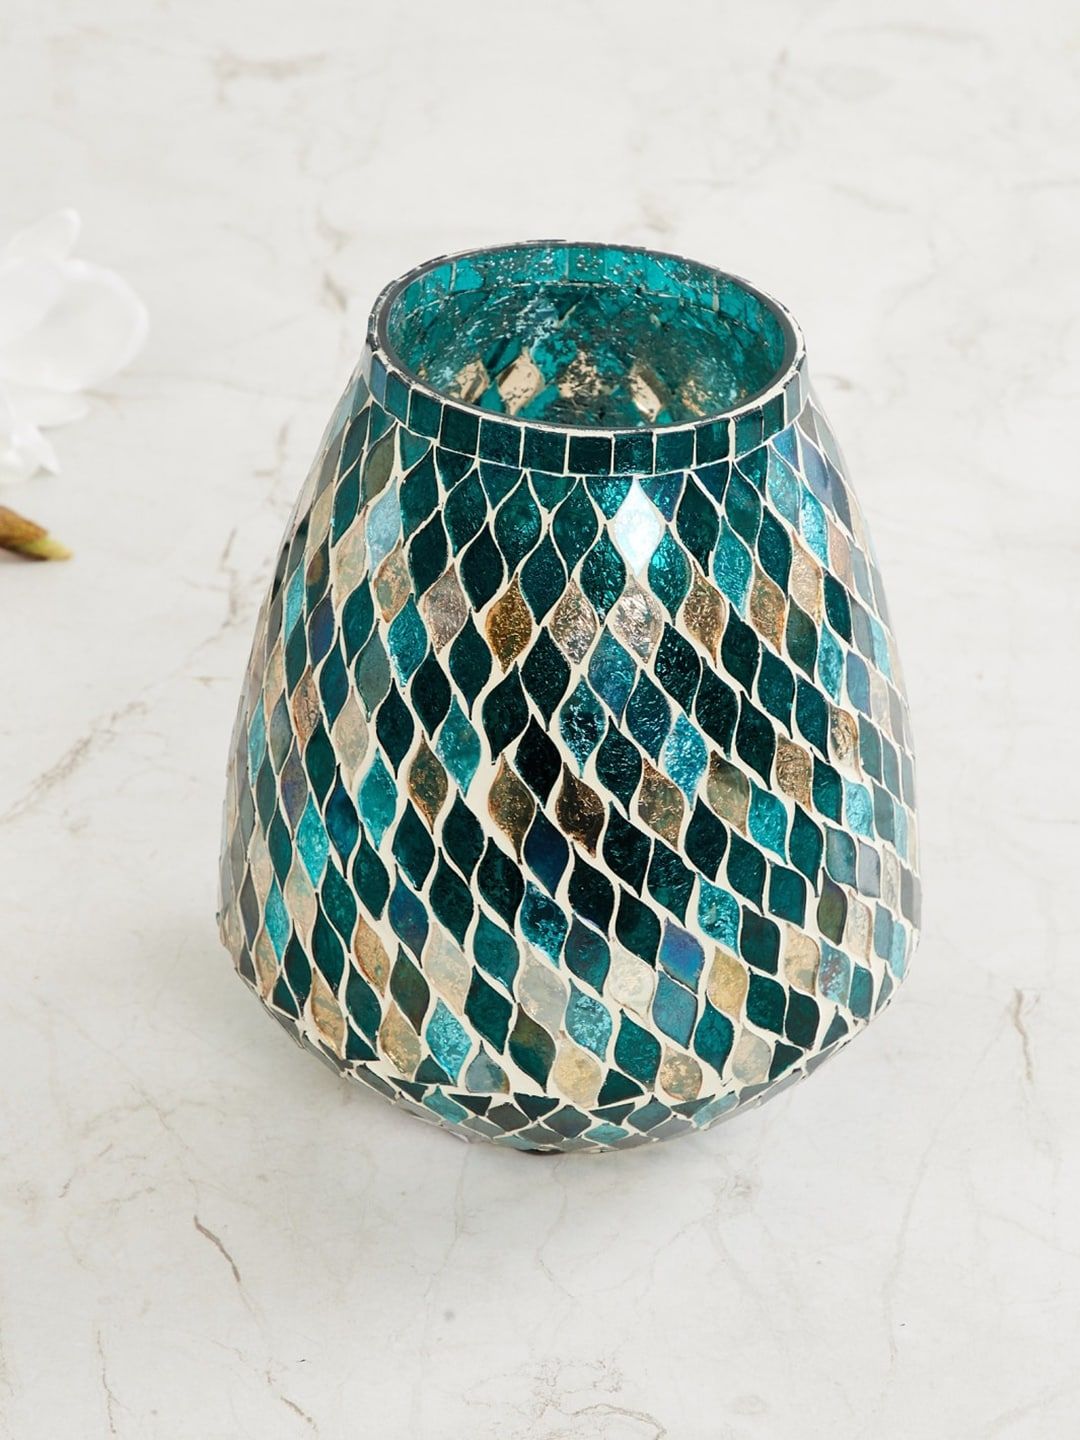 Home Centre Teal Blue & Green Textured Mariana Mosaic Table Lamp Price in India